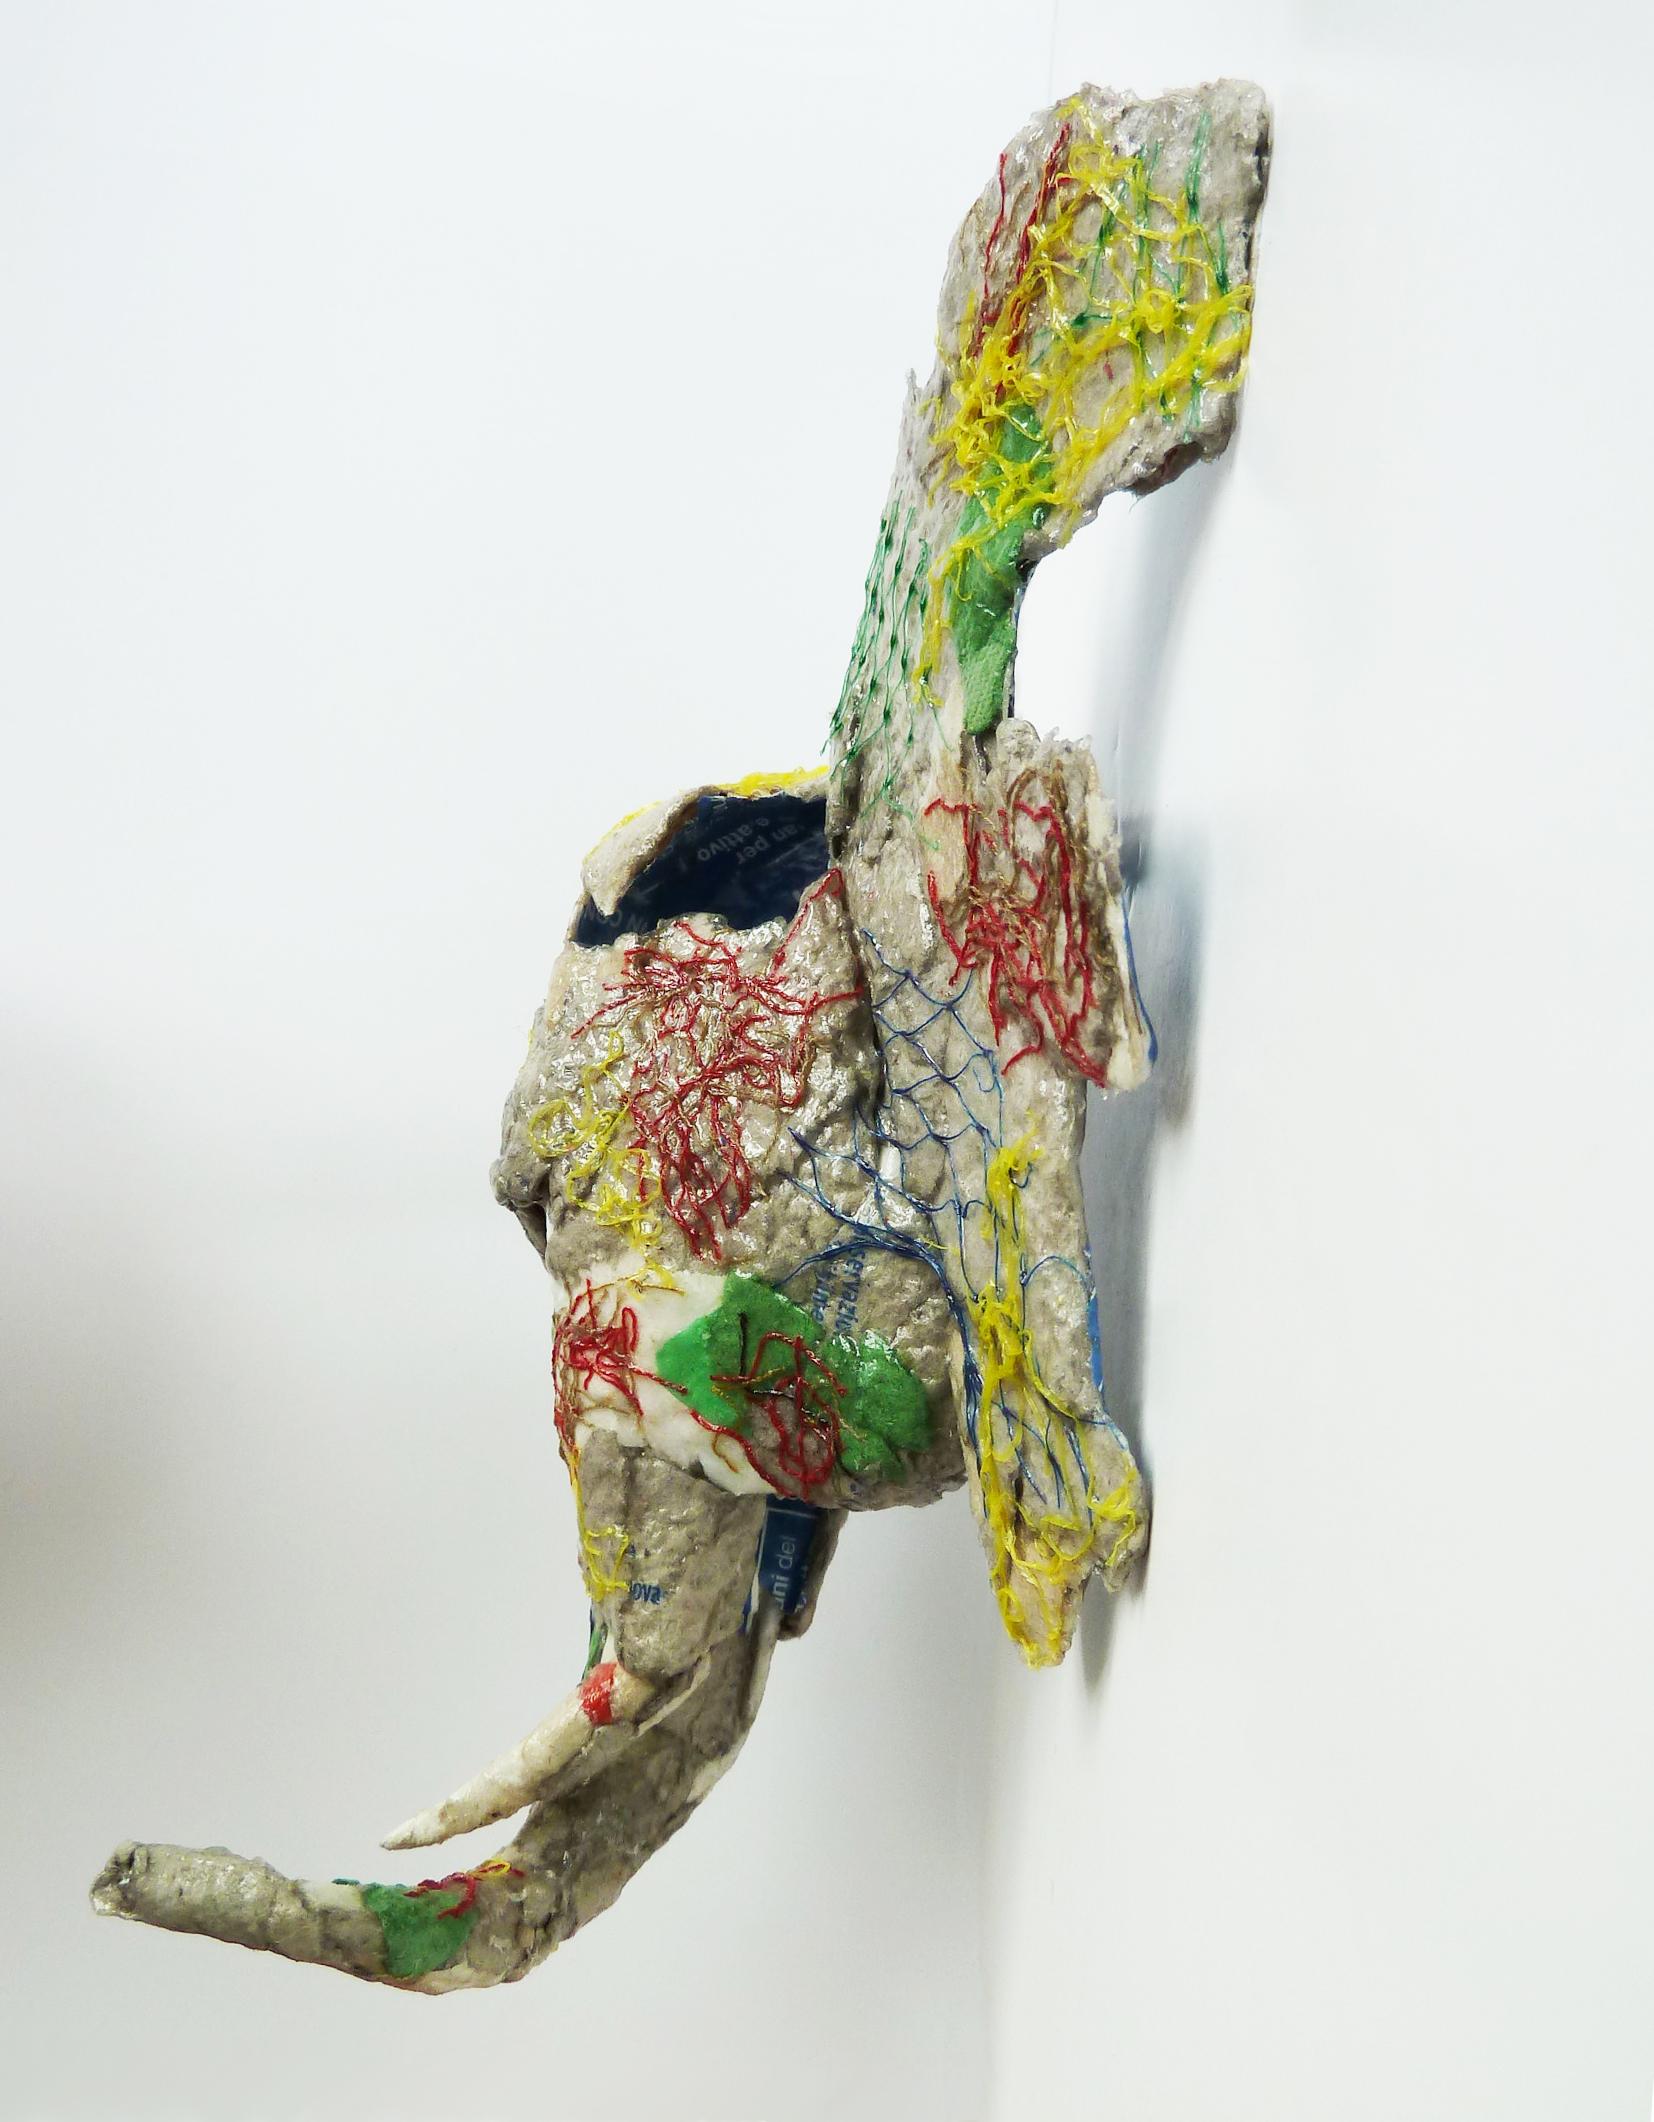 Elephant - Contemporary Mixed Media Animal Sculpture From Upcycled Materials 2